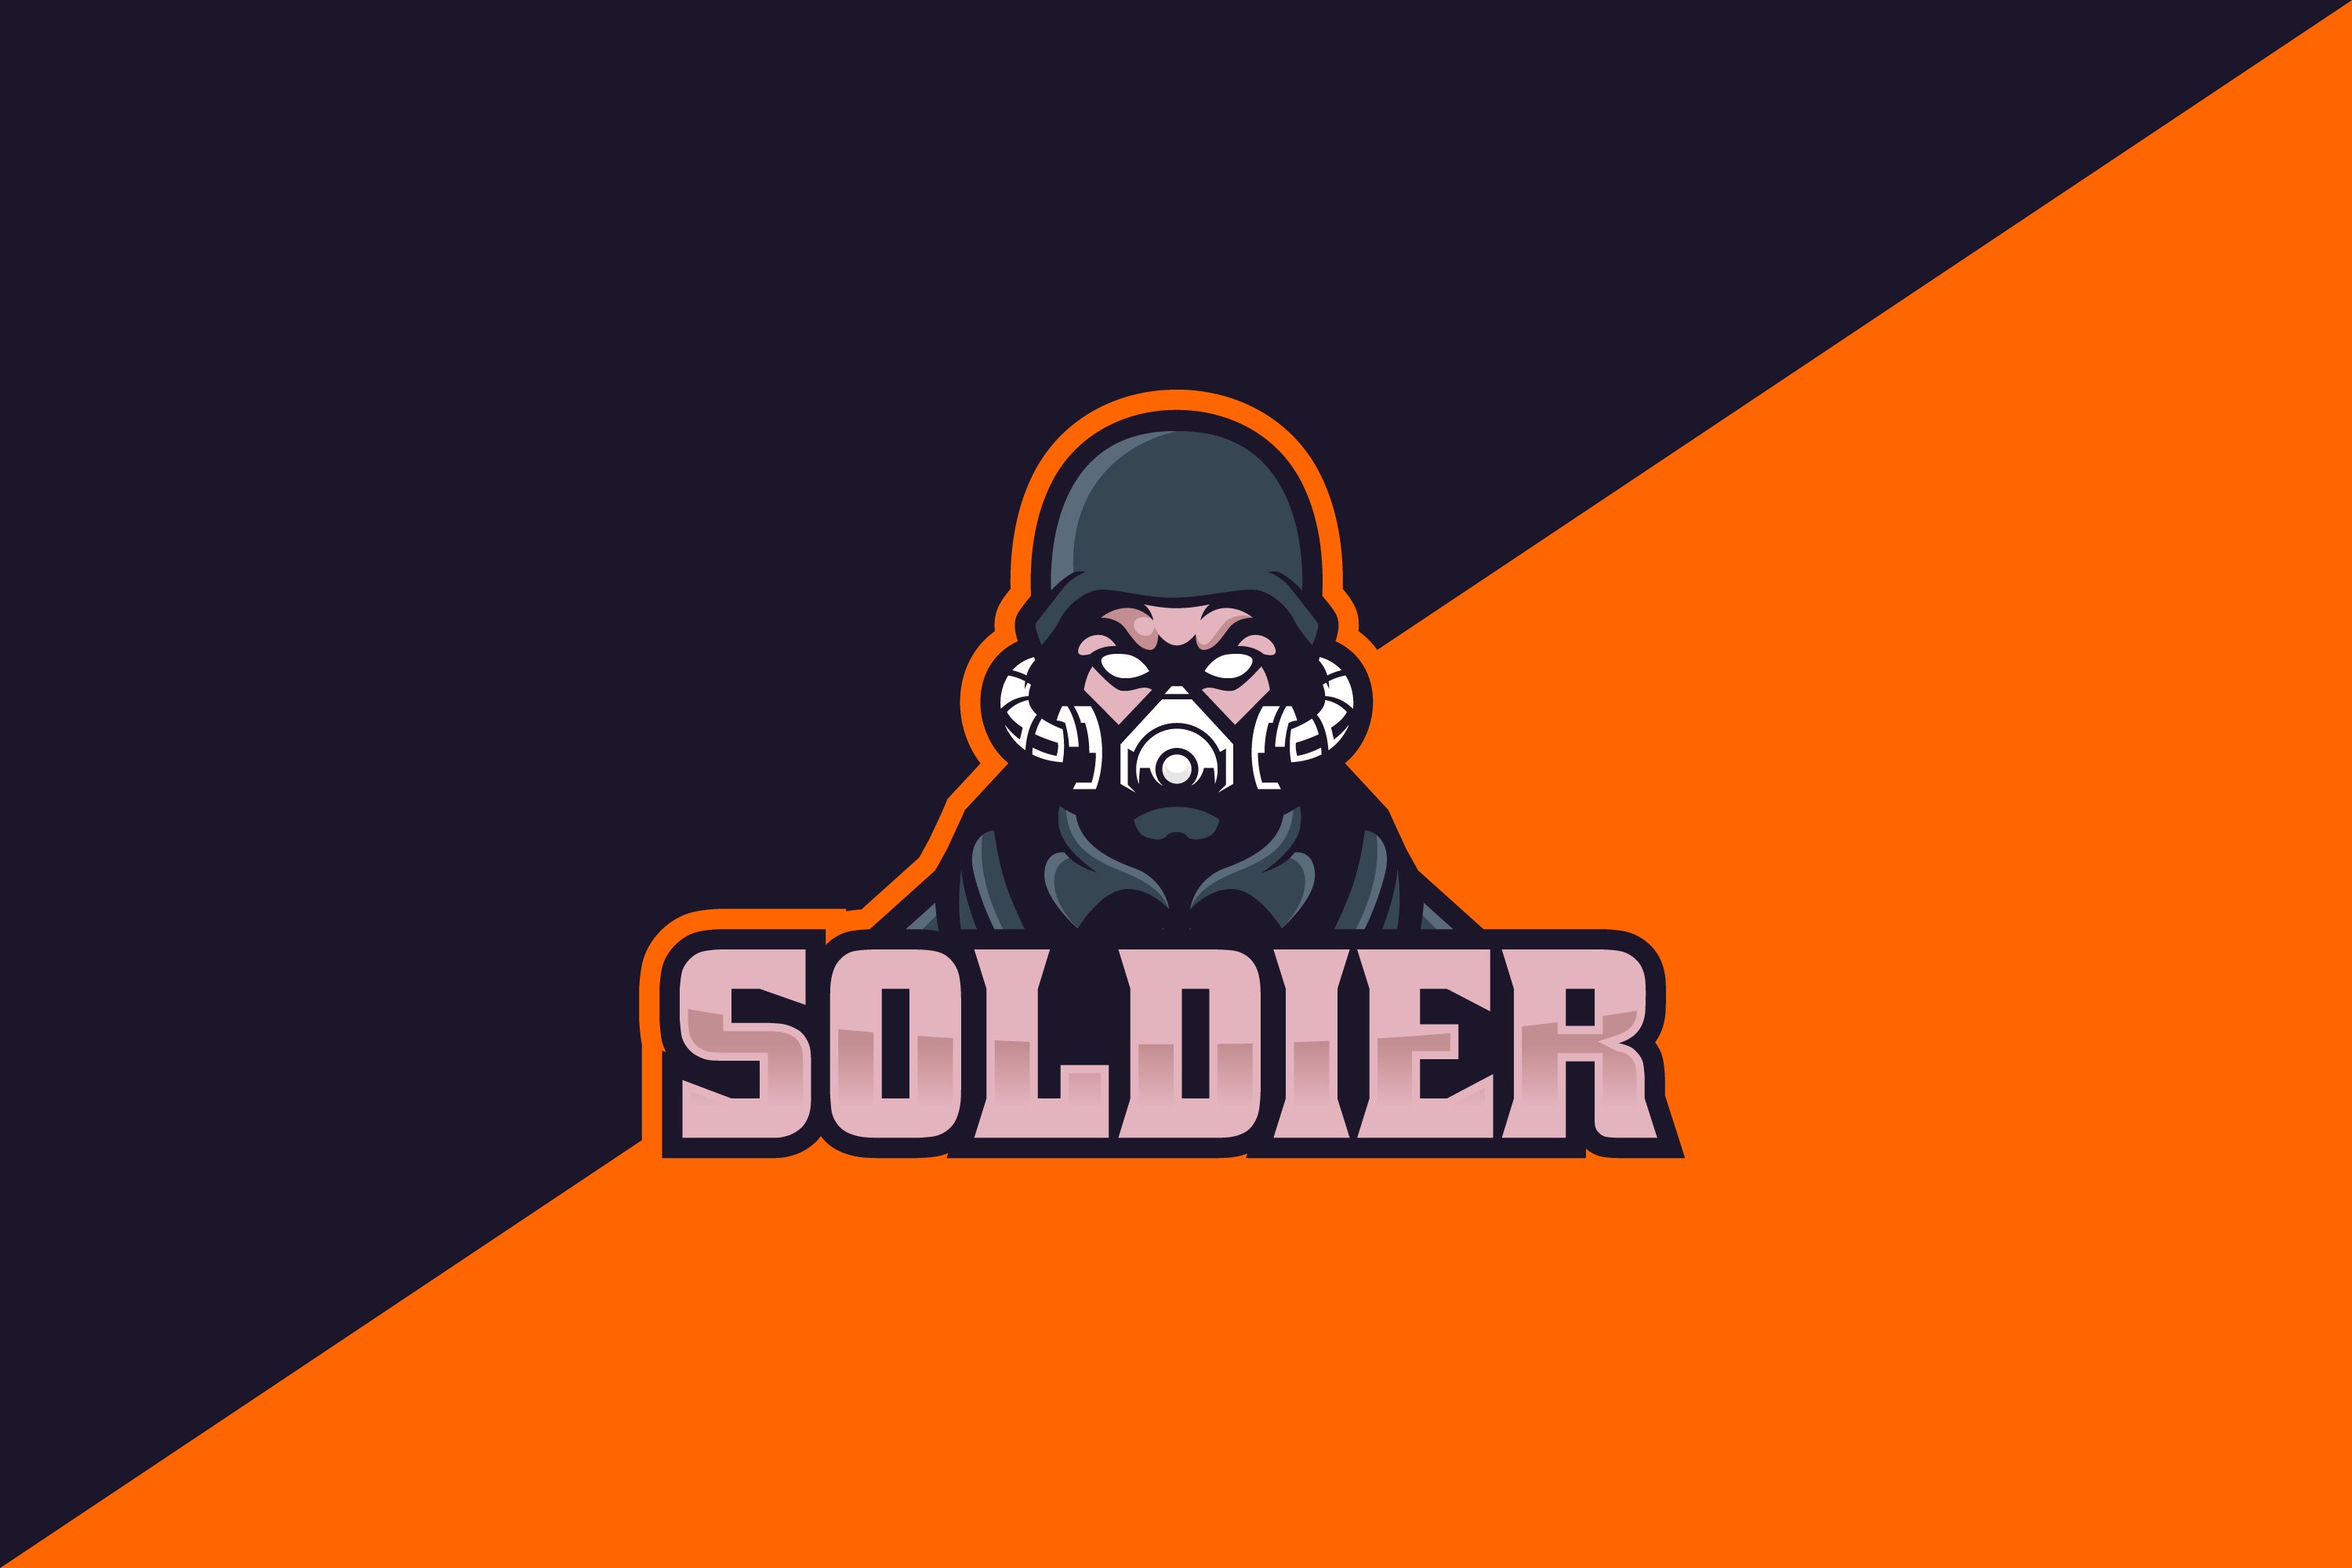 Soldier Military Esport Logo cover image.